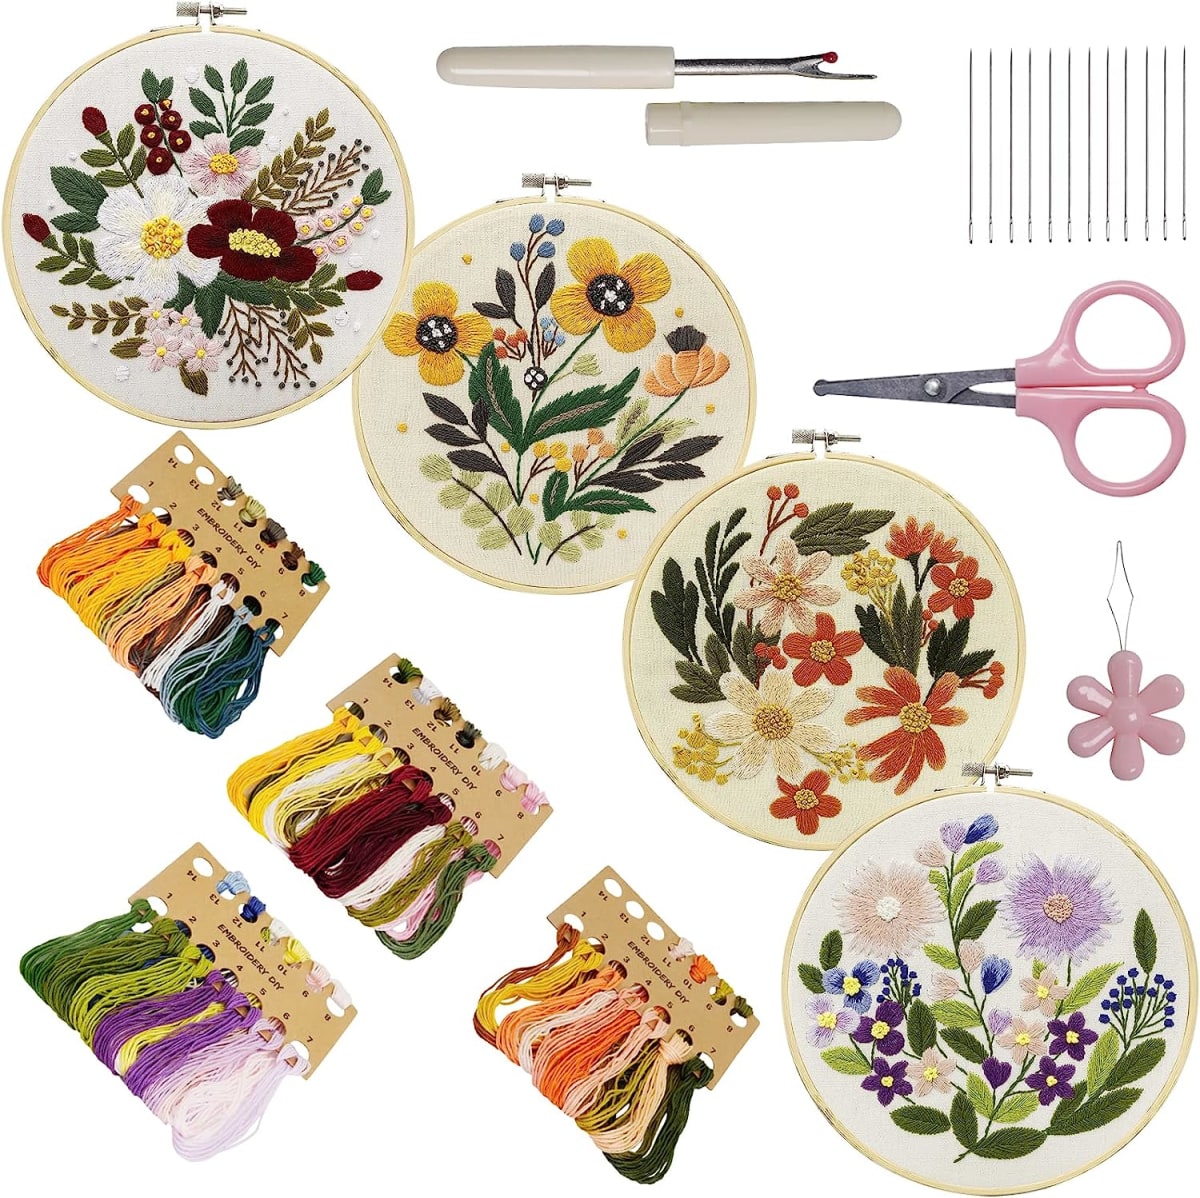 Embroidery Kit for Art Craft Handy Sewing